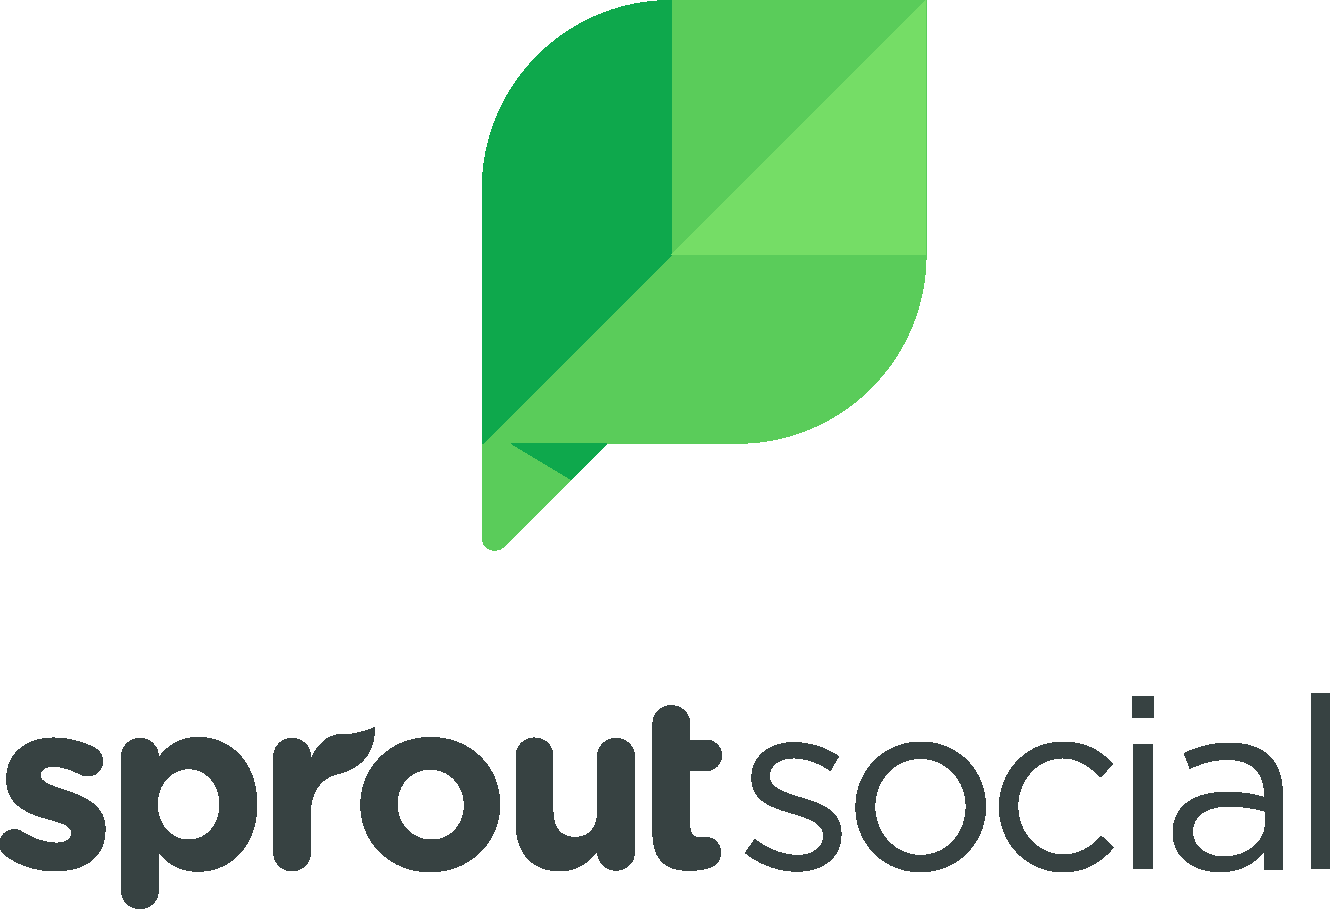 Sprout Social is a social media management and intelligence tool for brands and agencies of all sizes to manage conversations and surface the actionable insights that drive real business impact.